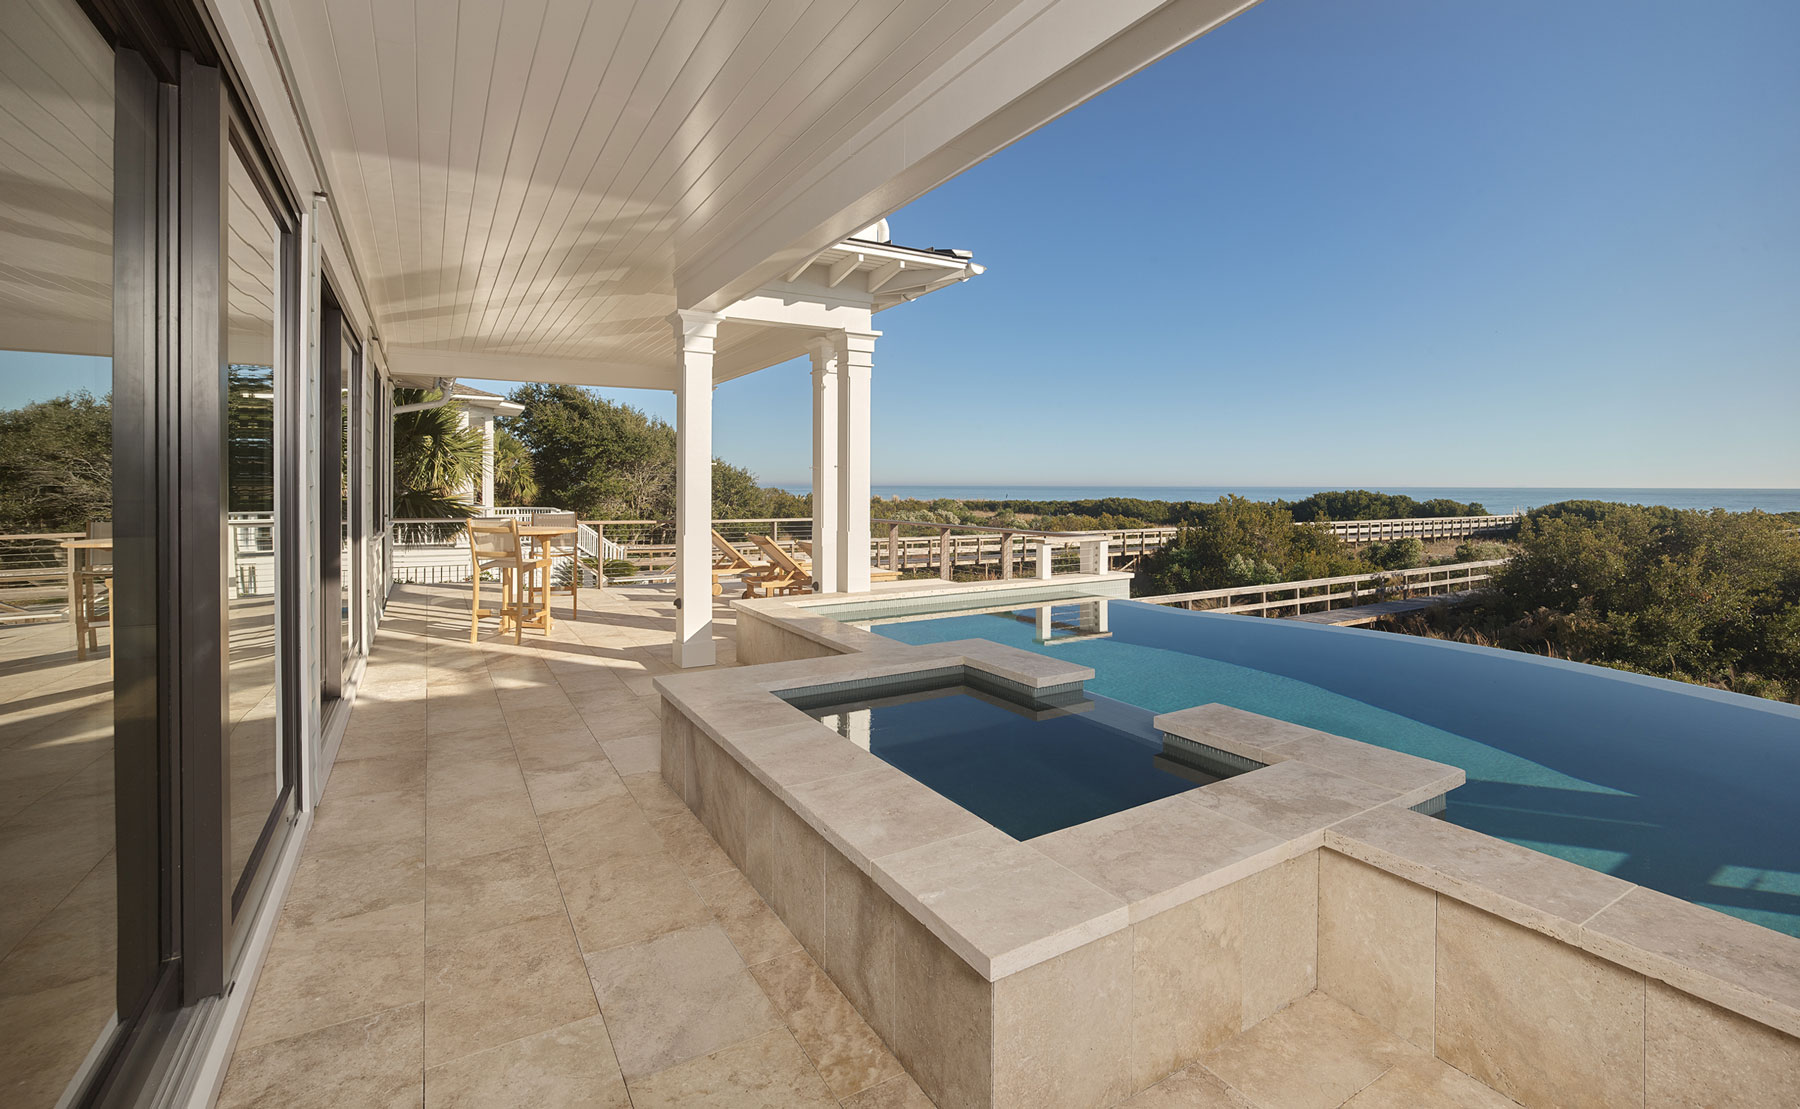 Outdoor living with infinity edge pool. Ocean front in Isle of Palms